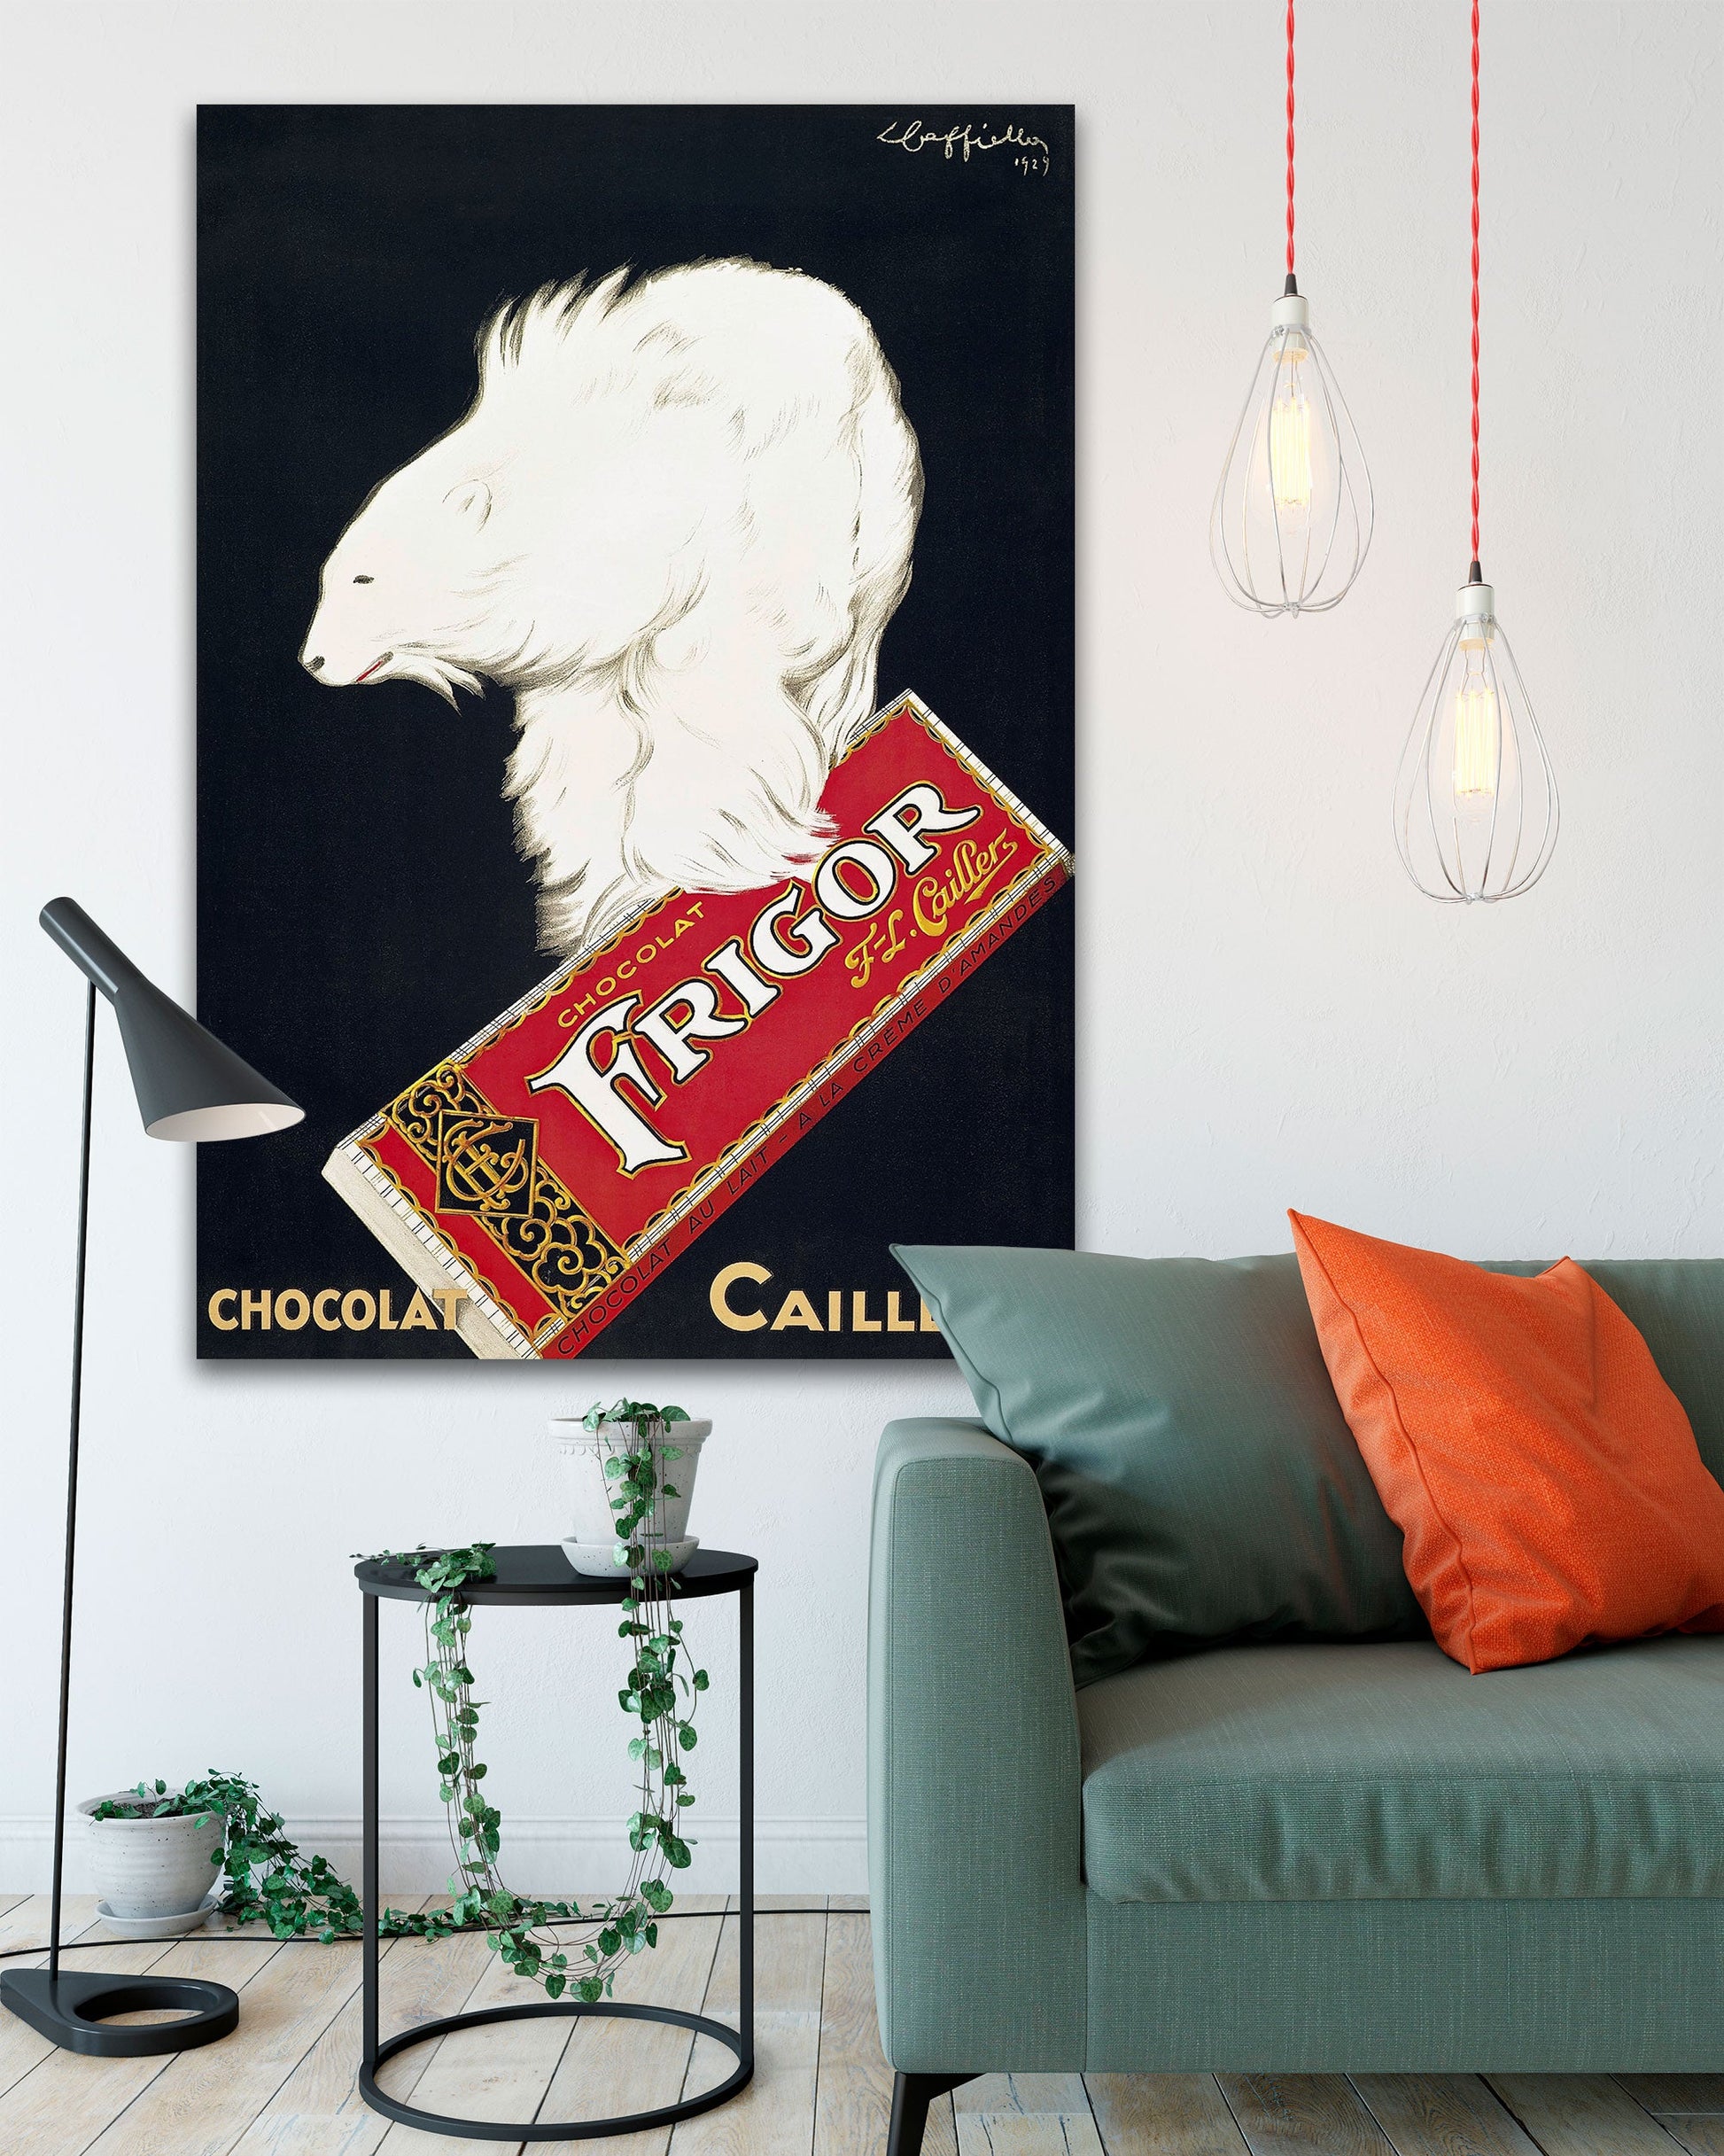 Vintage Leonetto Cappiello Chocolat Frigor Poster hanging in a living room - Transit Design